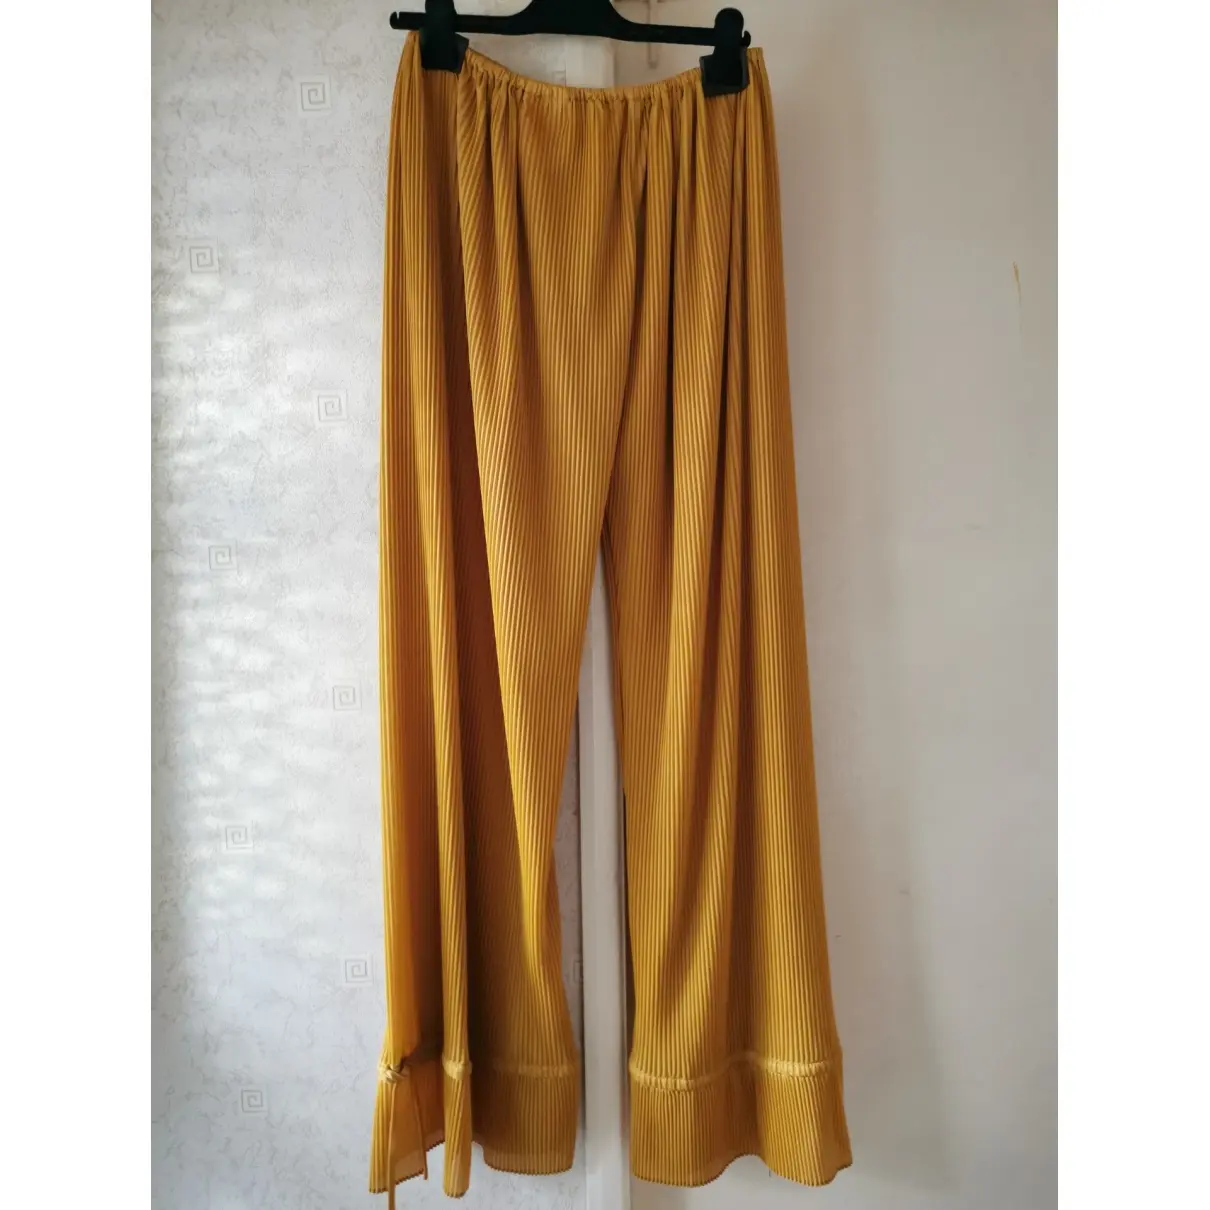 Mulberry Large pants for sale